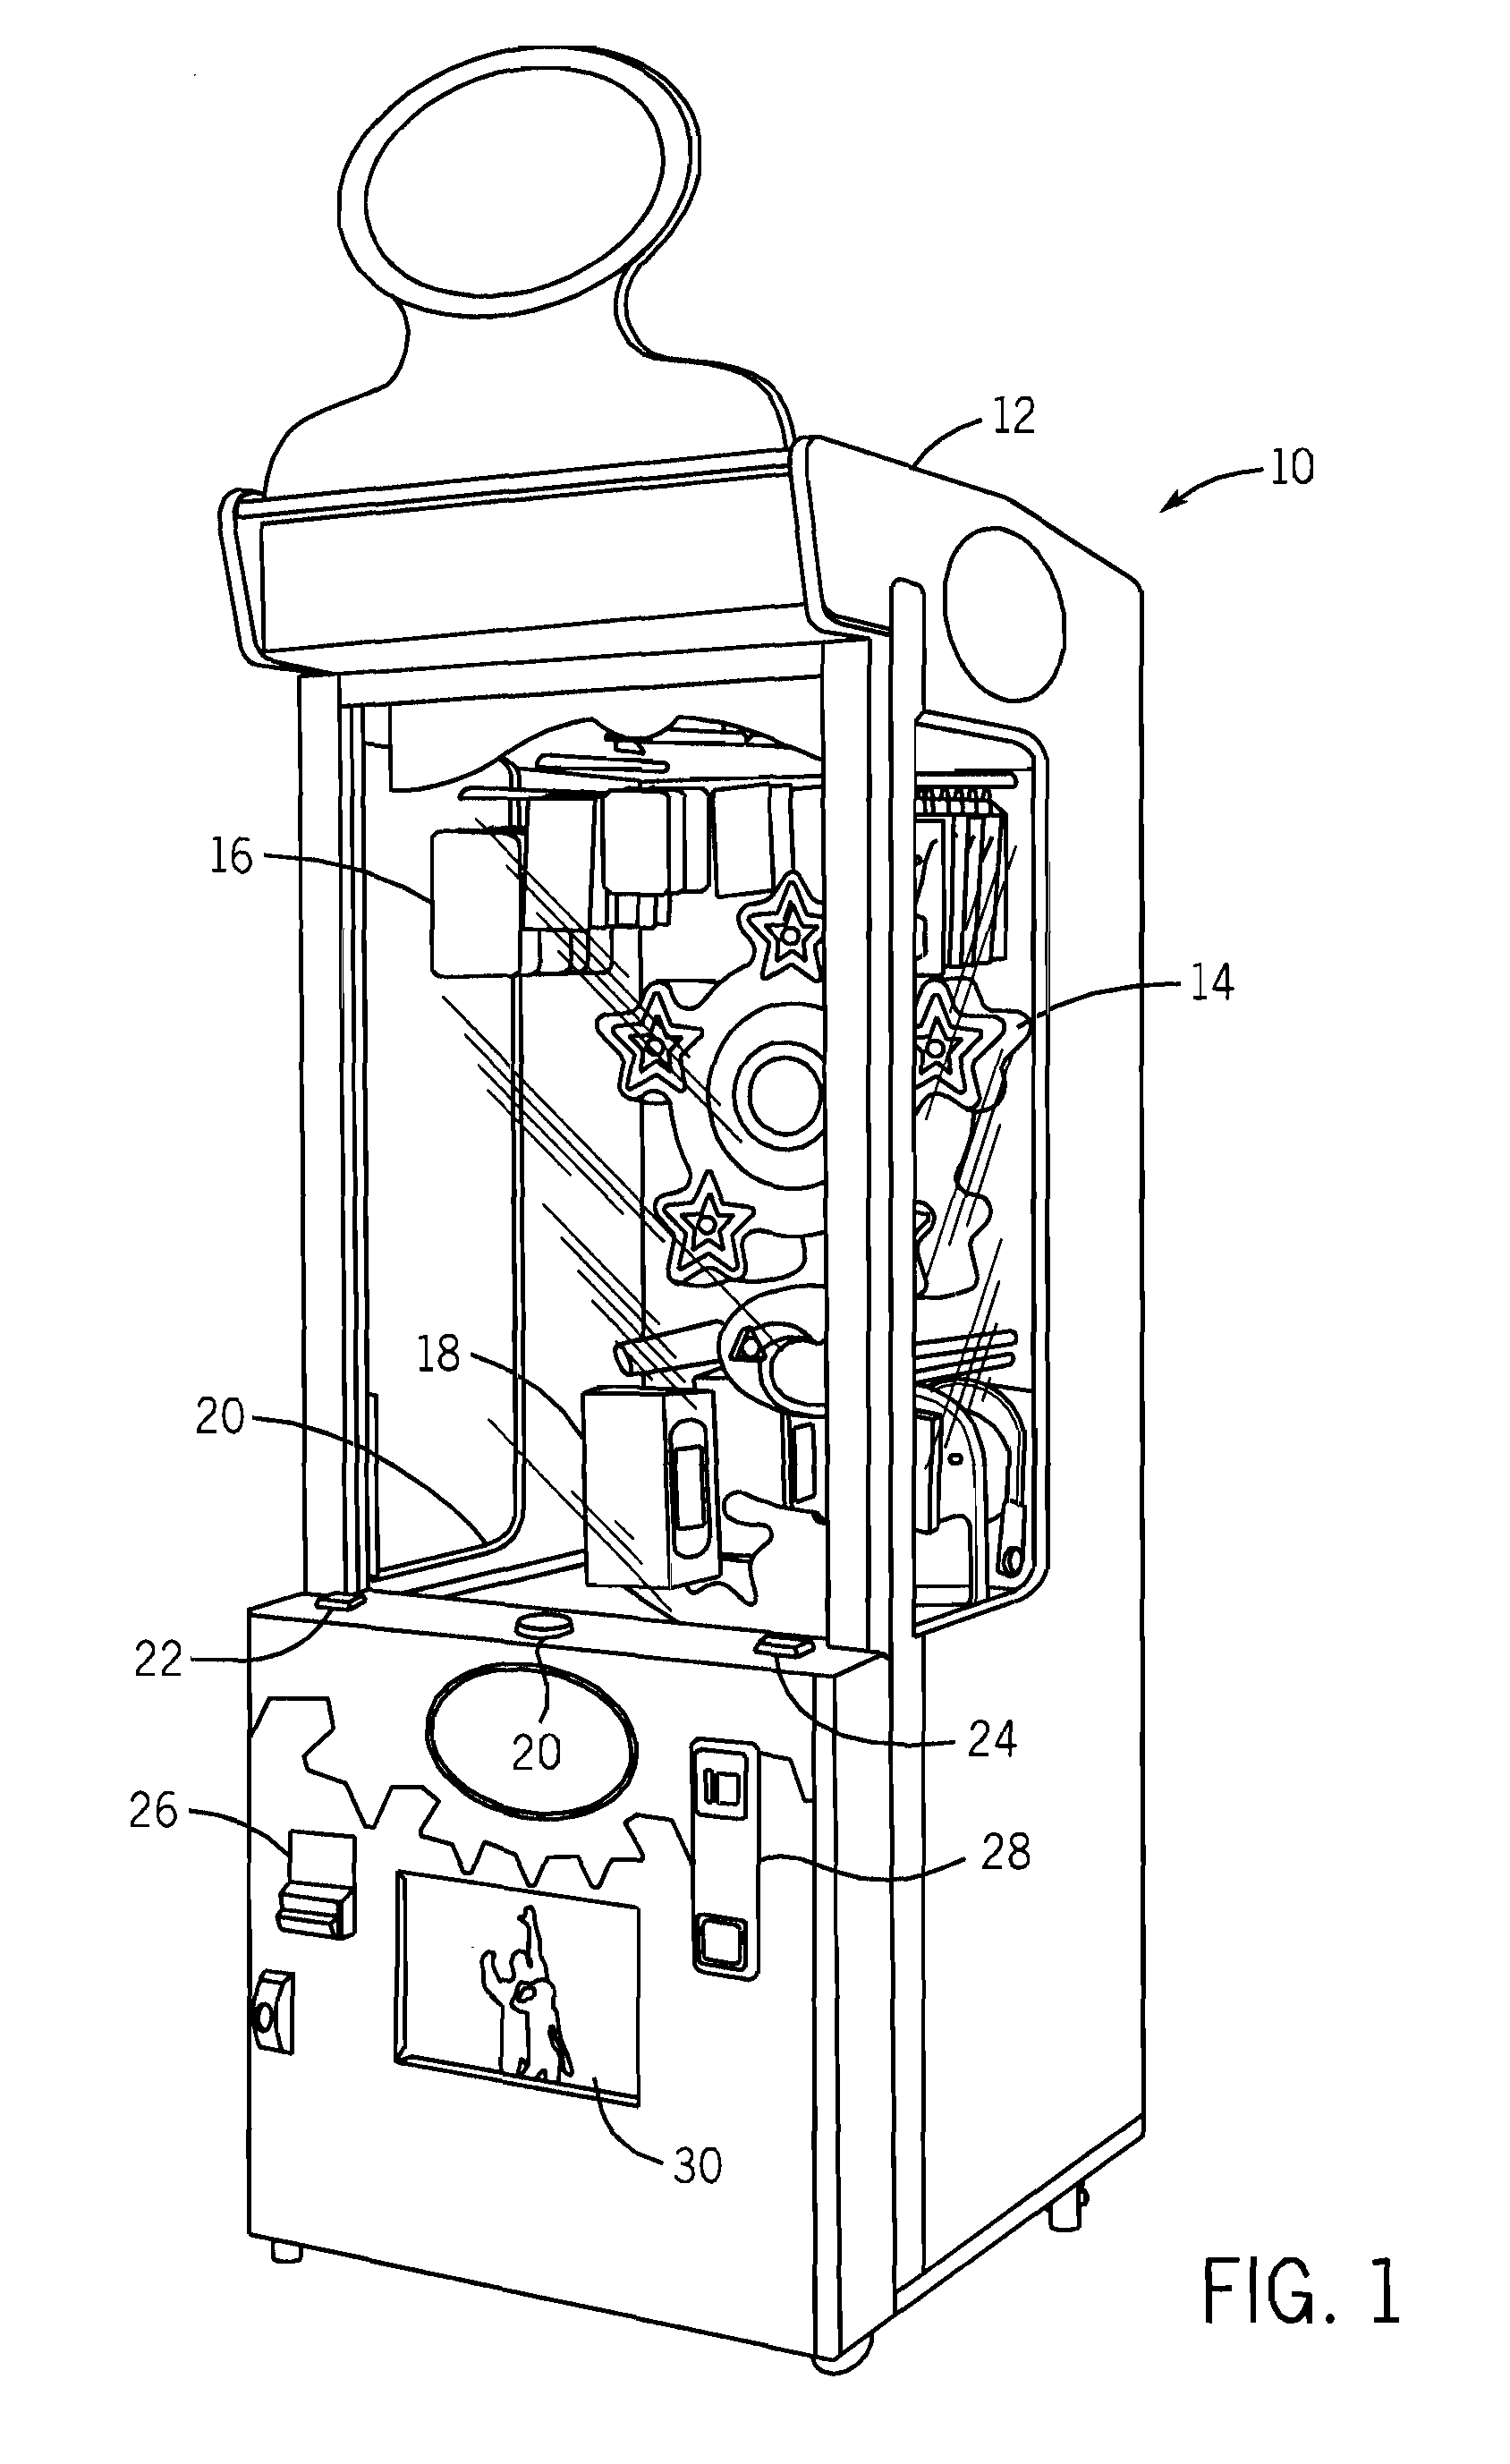 Game of skill and method of operating